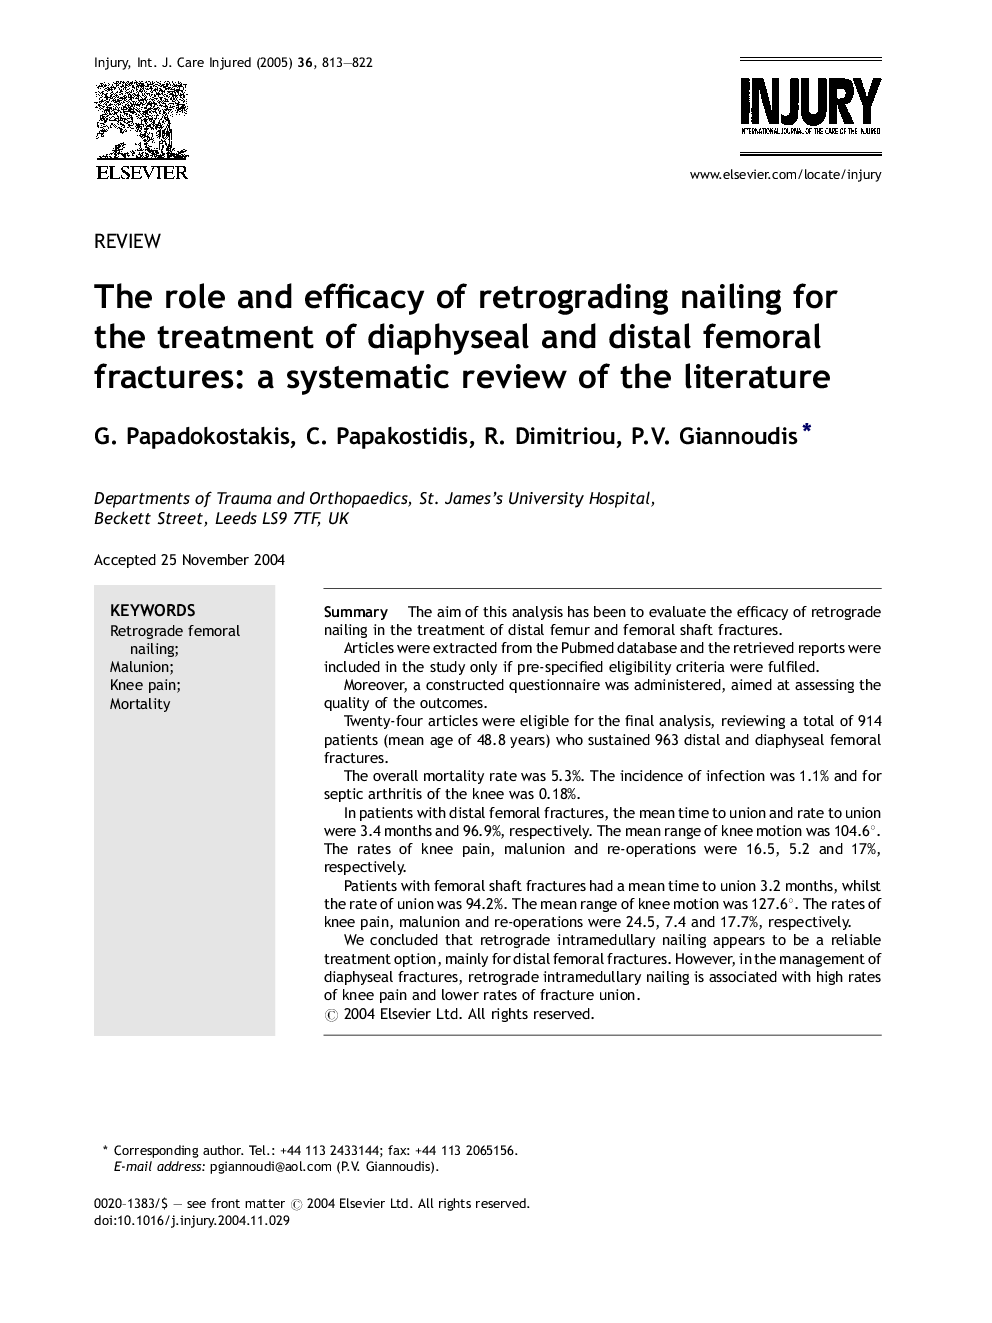 The role and efficacy of retrograding nailing for the treatment of diaphyseal and distal femoral fractures: a systematic review of the literature